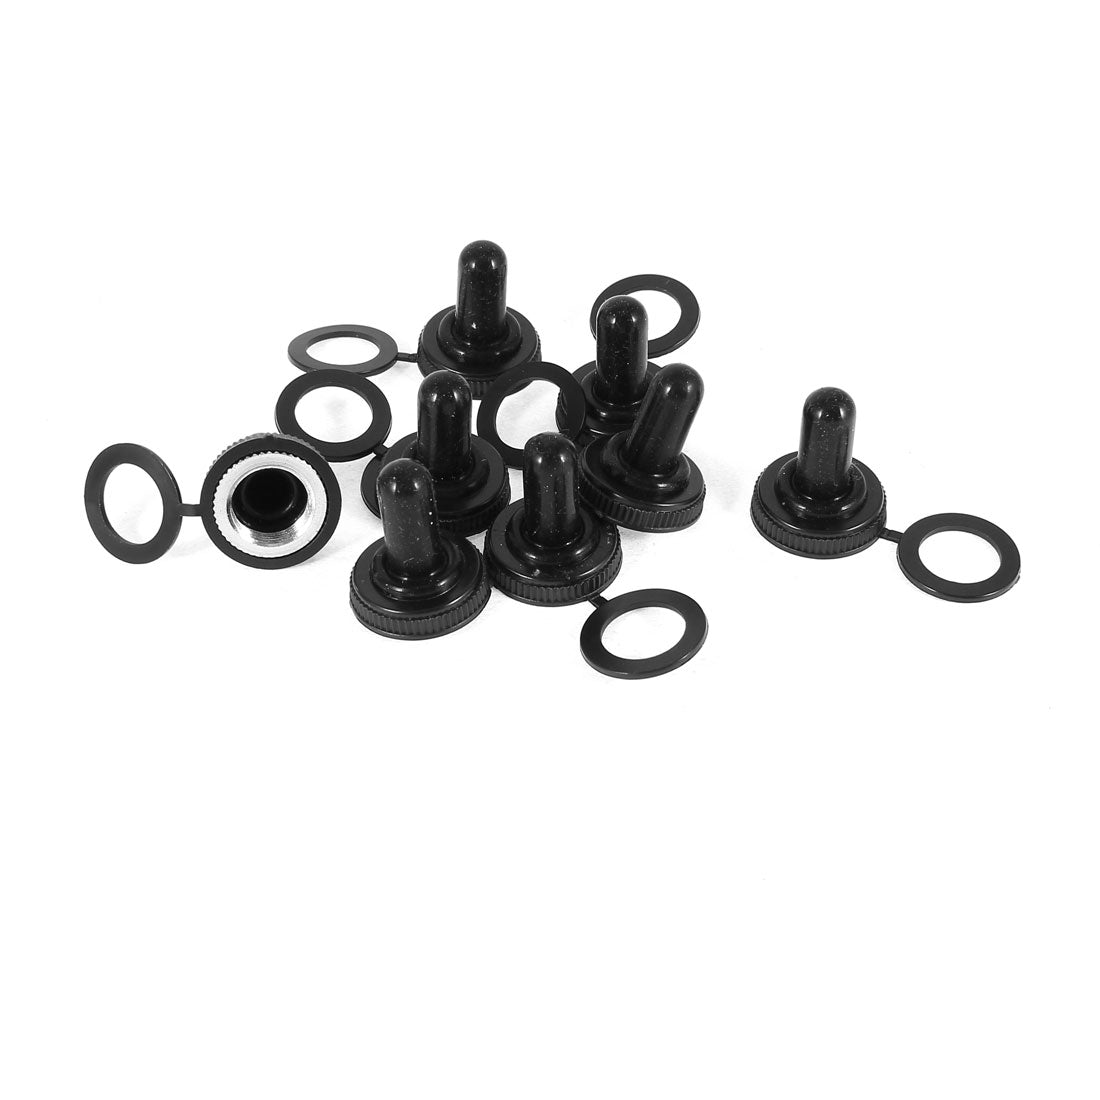 uxcell Uxcell 8 Pcs 12mm Waterproof Toggle Switch Rubber Cover Cap Seal